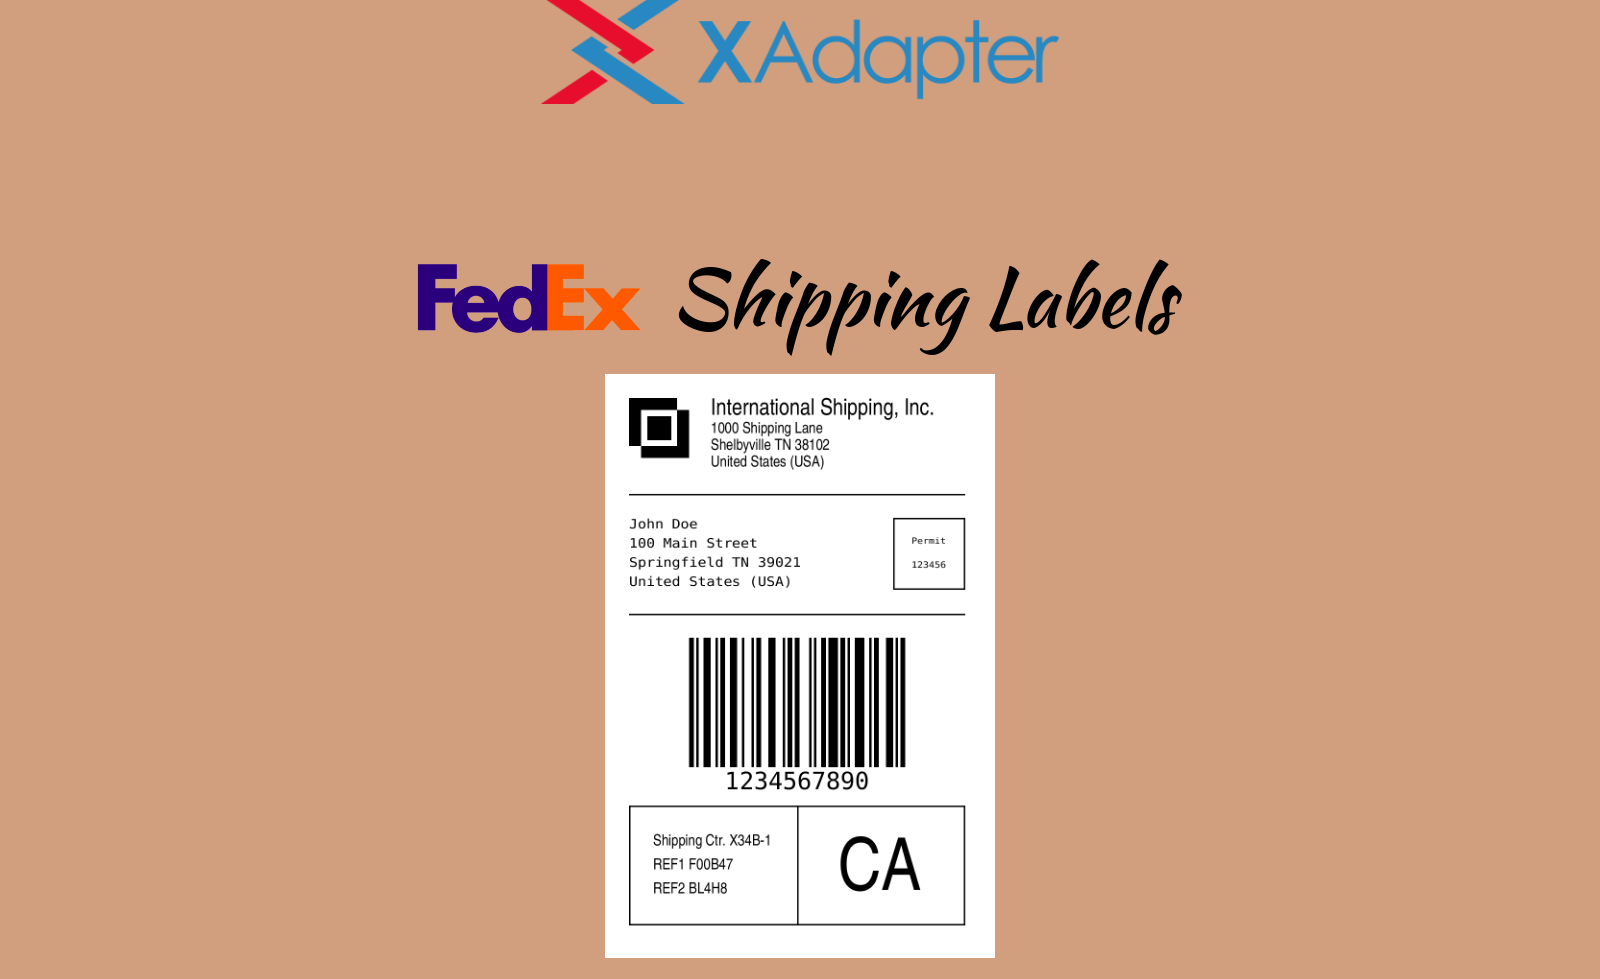 print-woocommerce-fedex-shipping-labels-in-multiple-sizes-xadapter